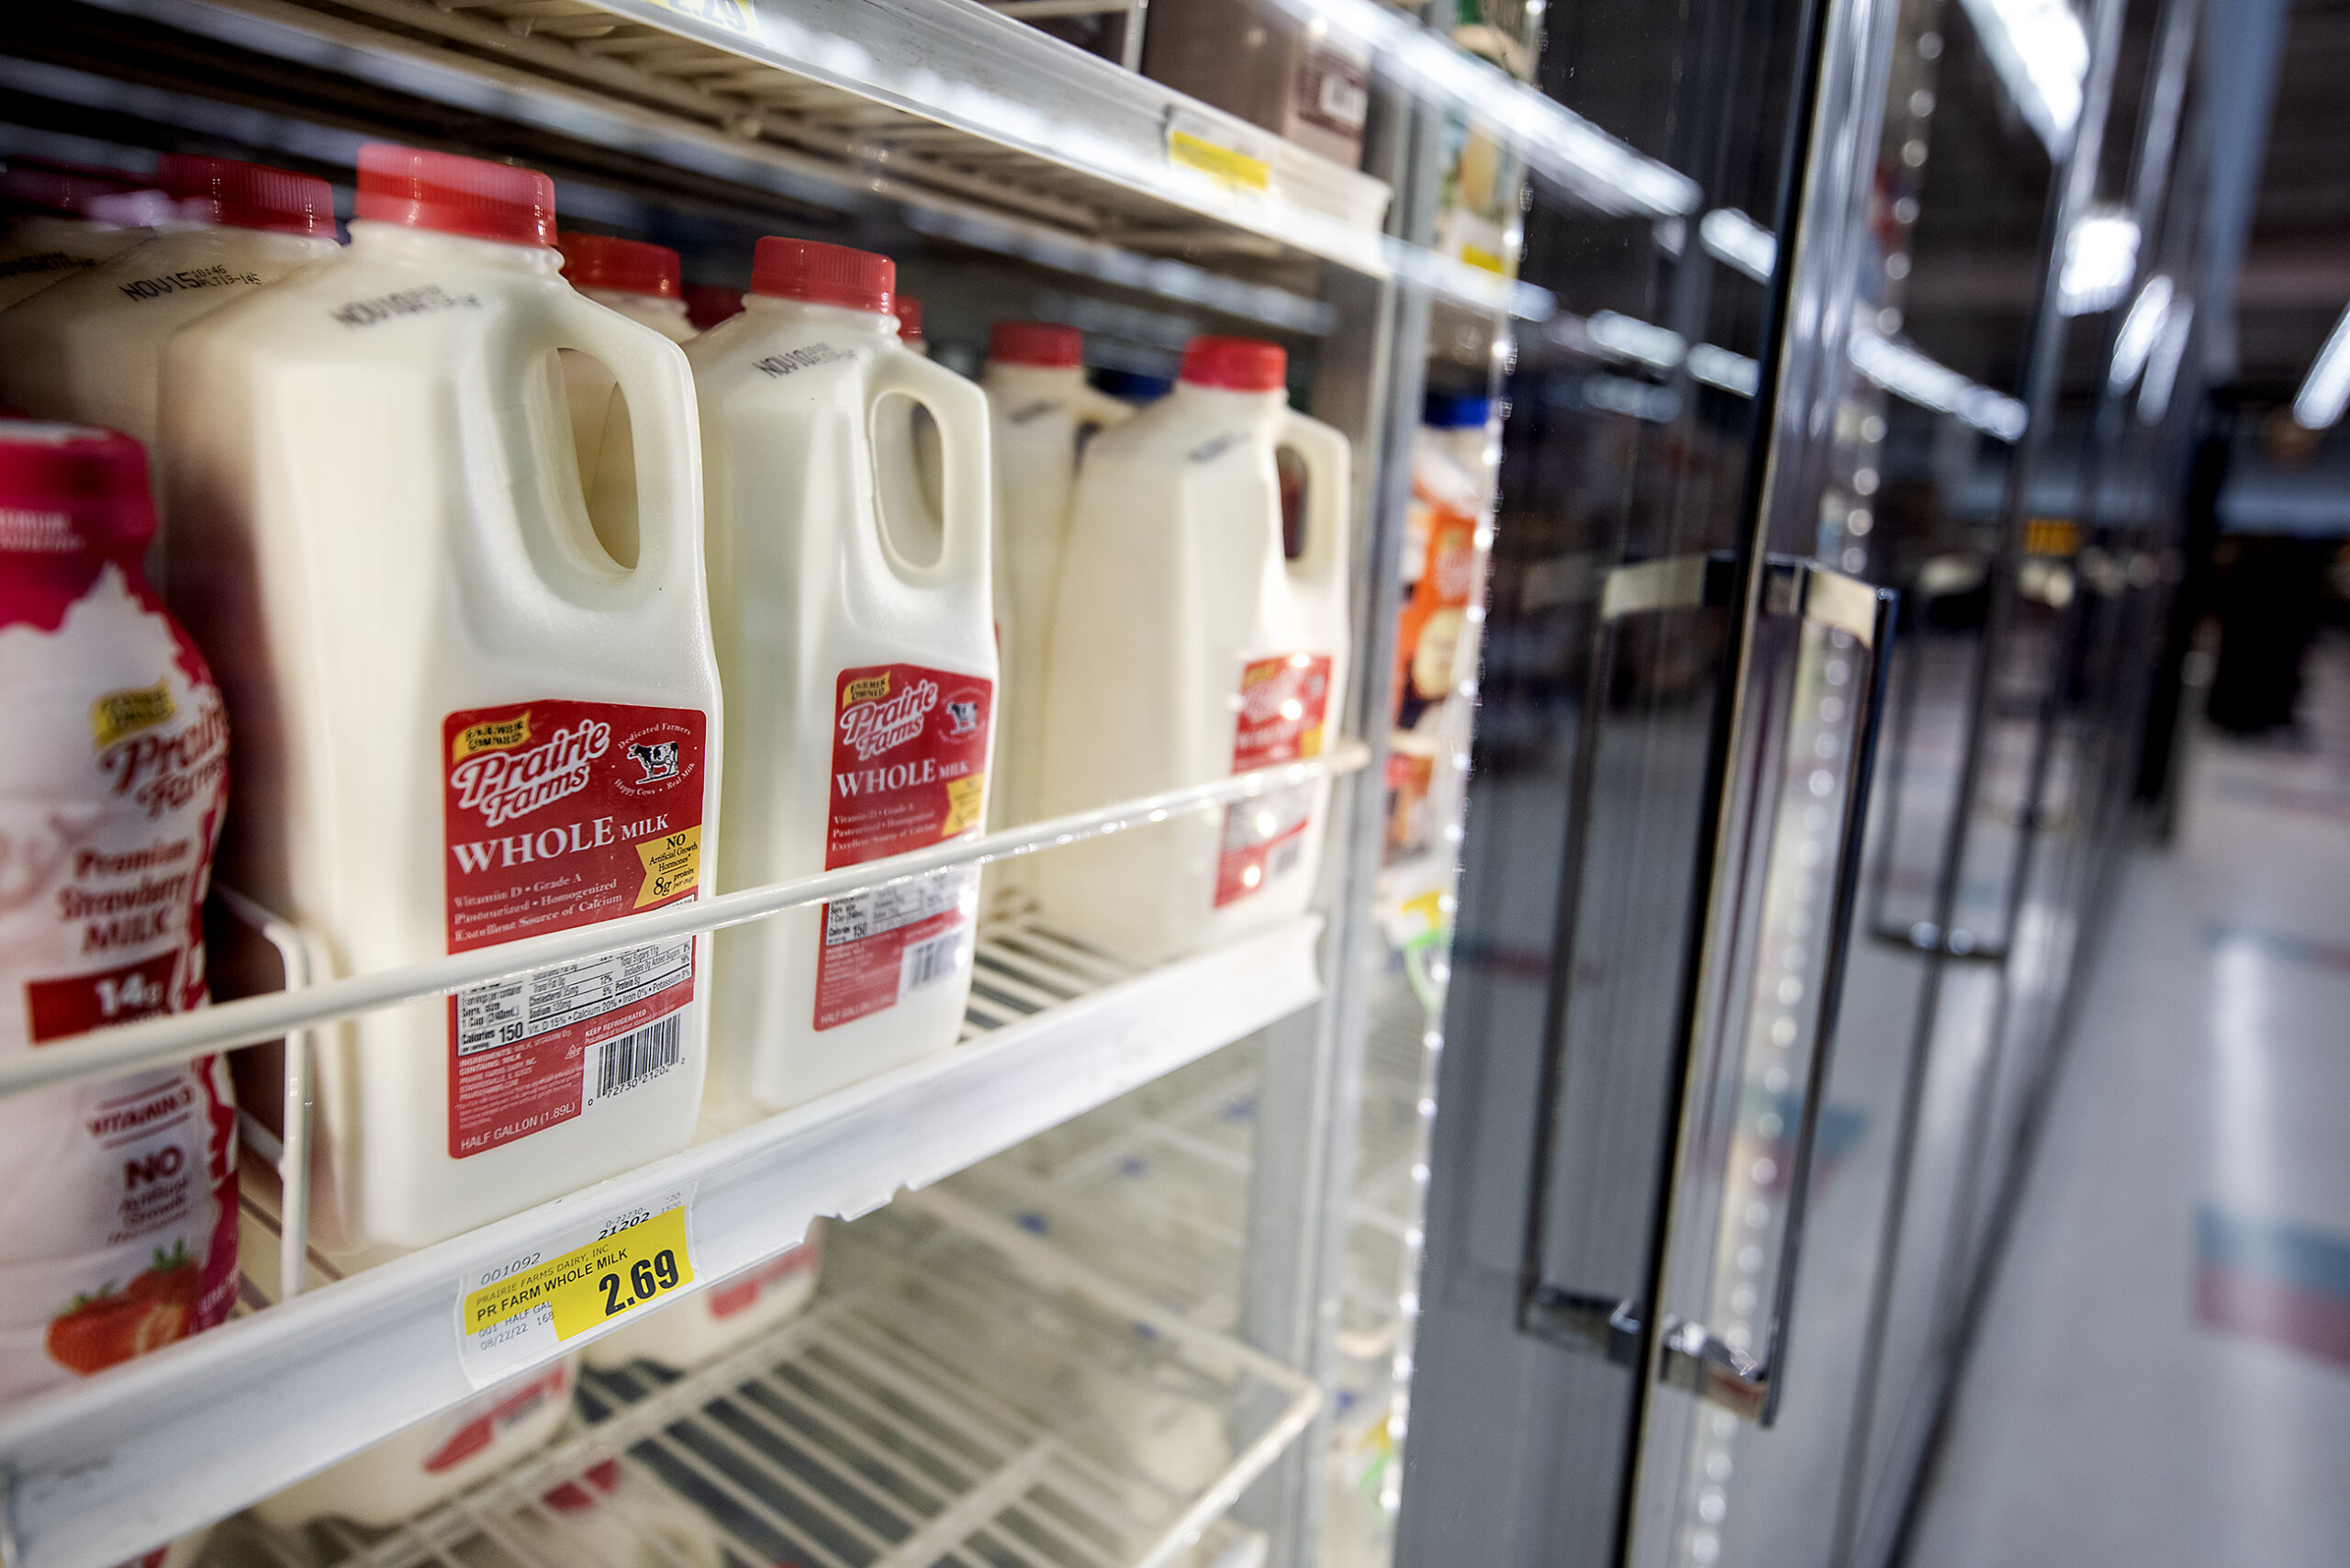 Half gallon cartons of whole milk with red labels are seen on a shelf behind glass.